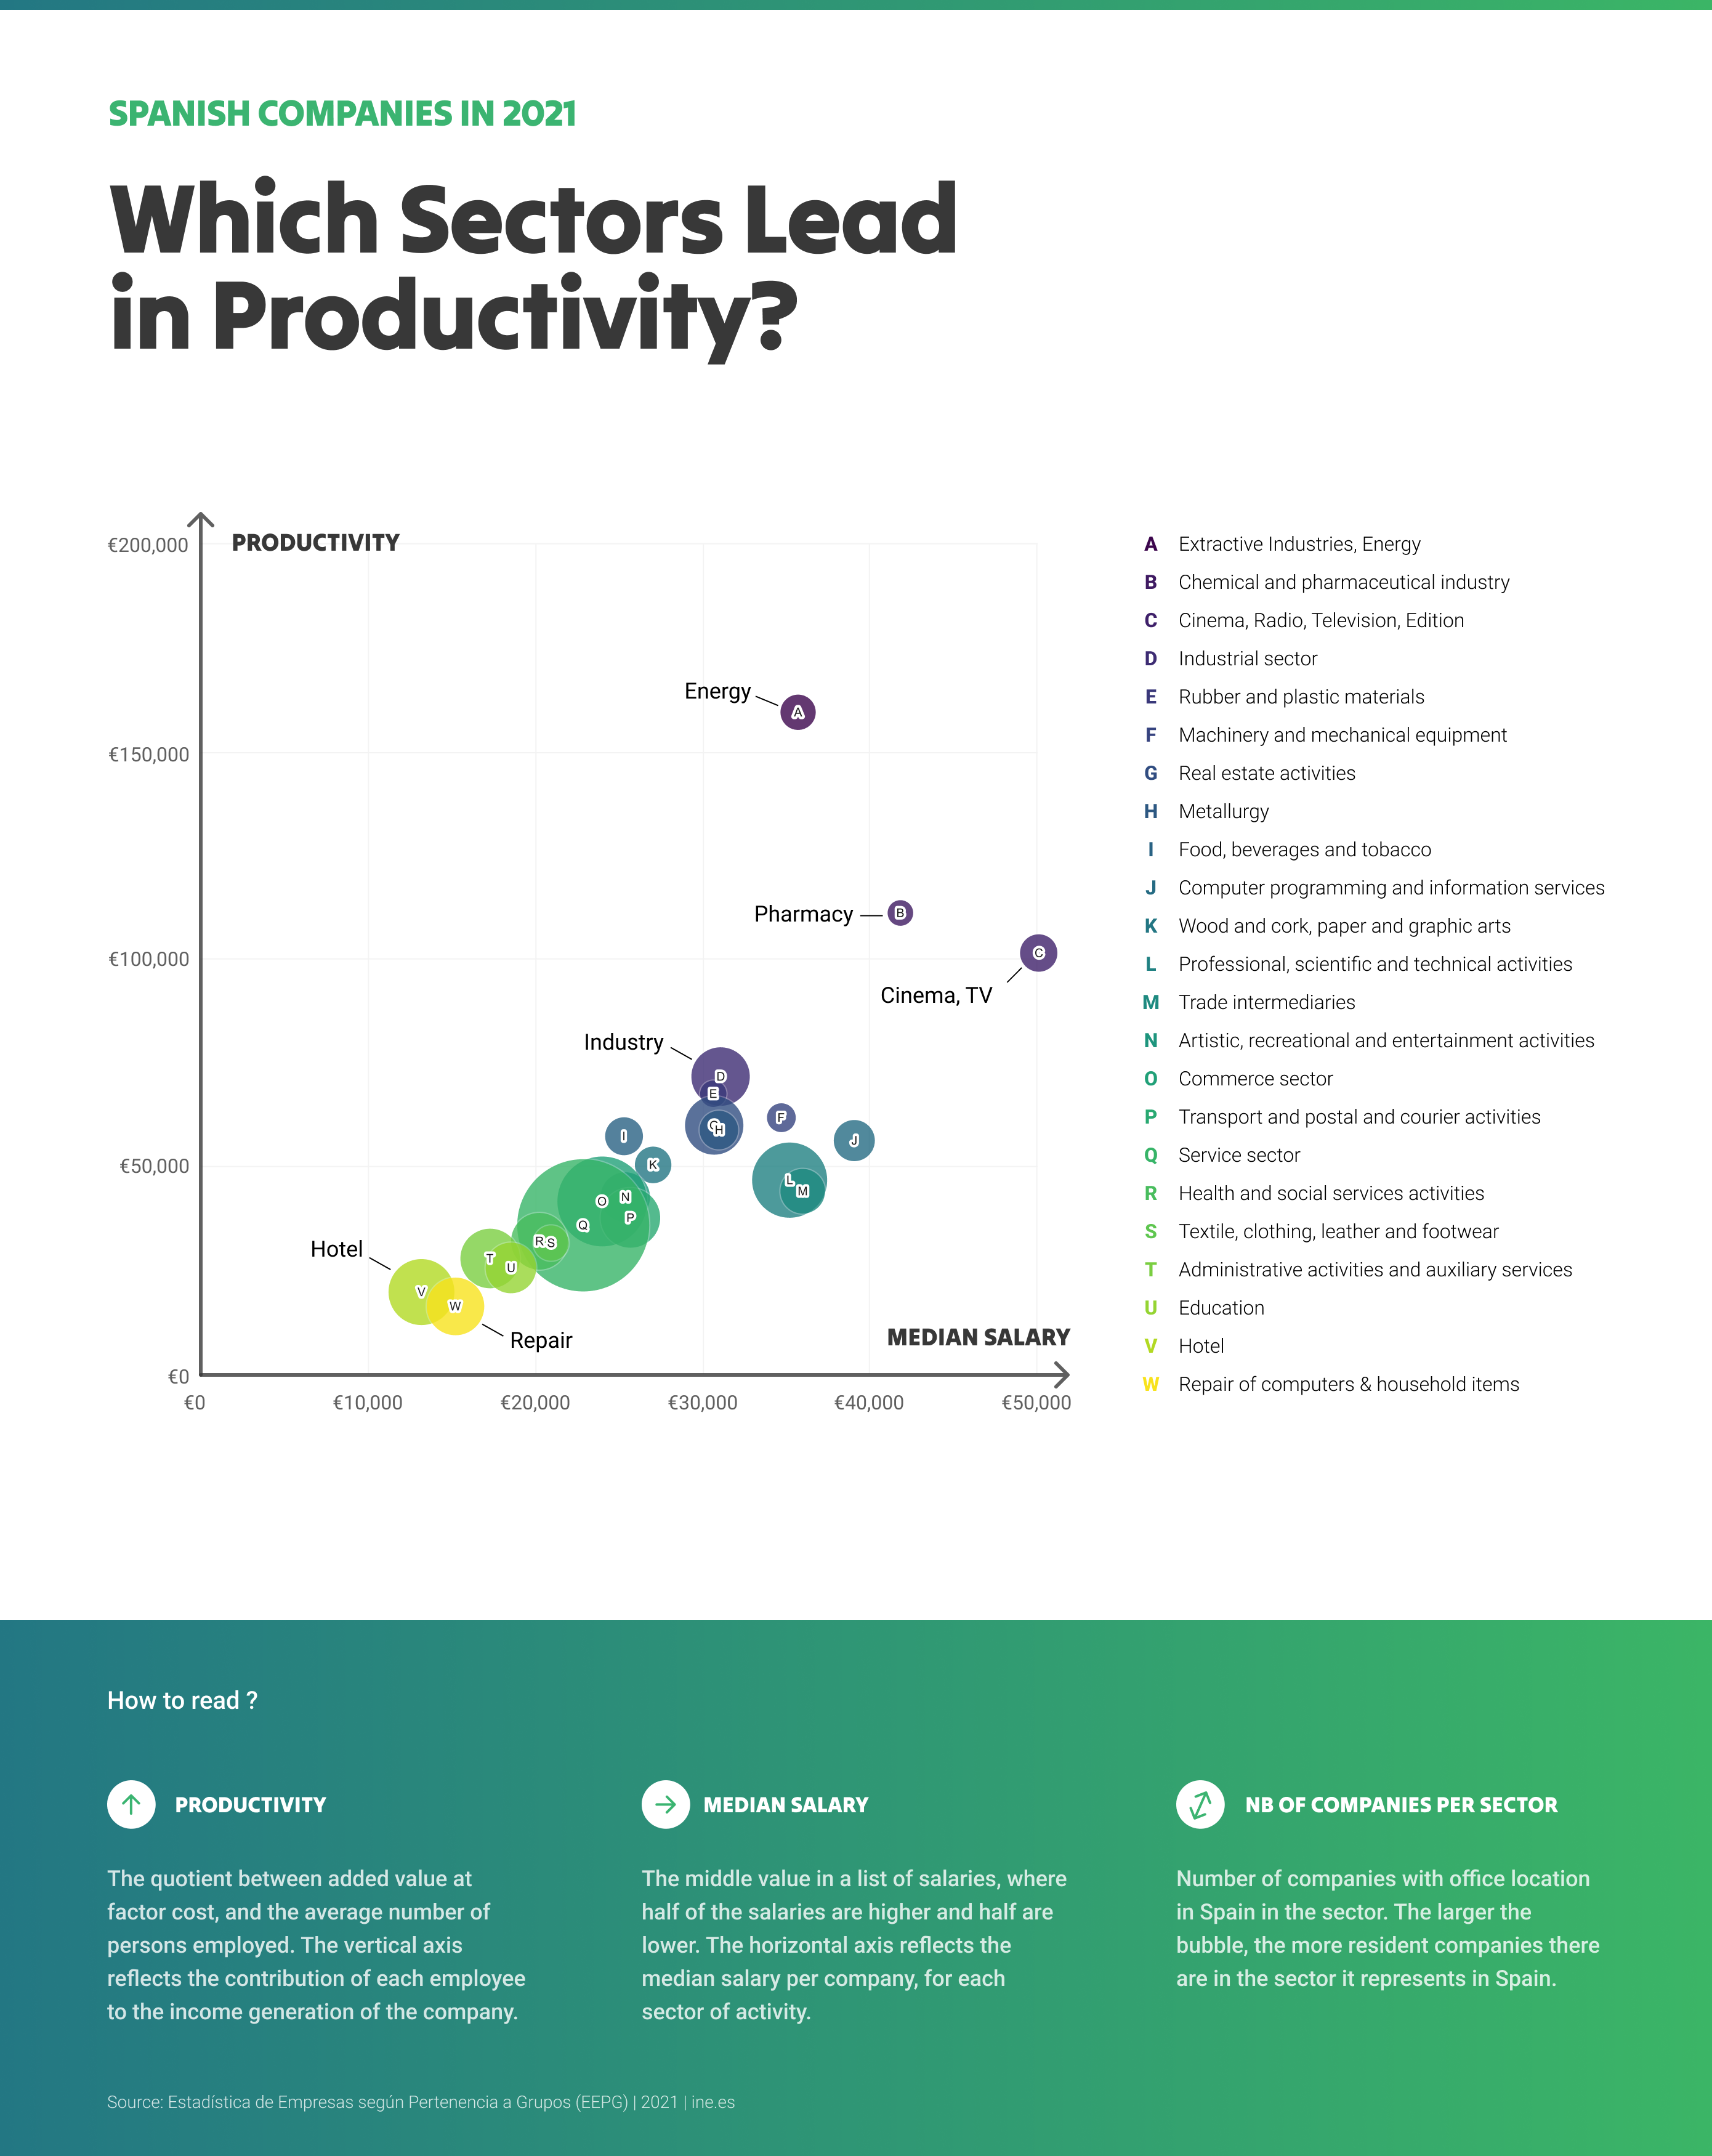 Productivity in 2021 of Spanish multinational companies in several sectors